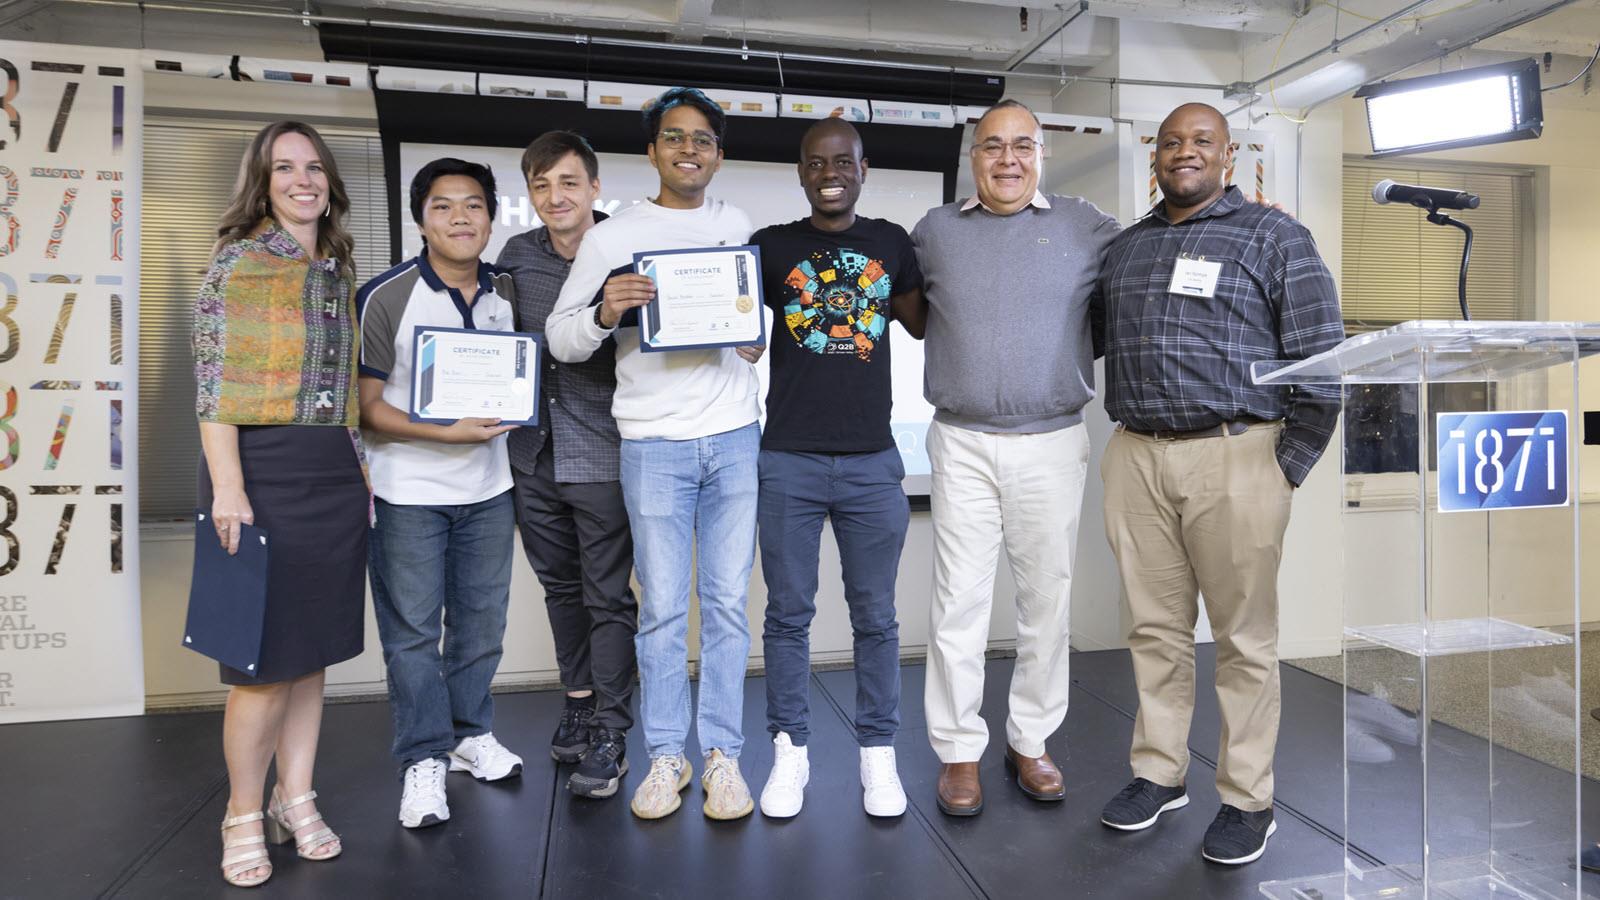 Ian Njoroge, far right, with winning team in quantum computing competition.